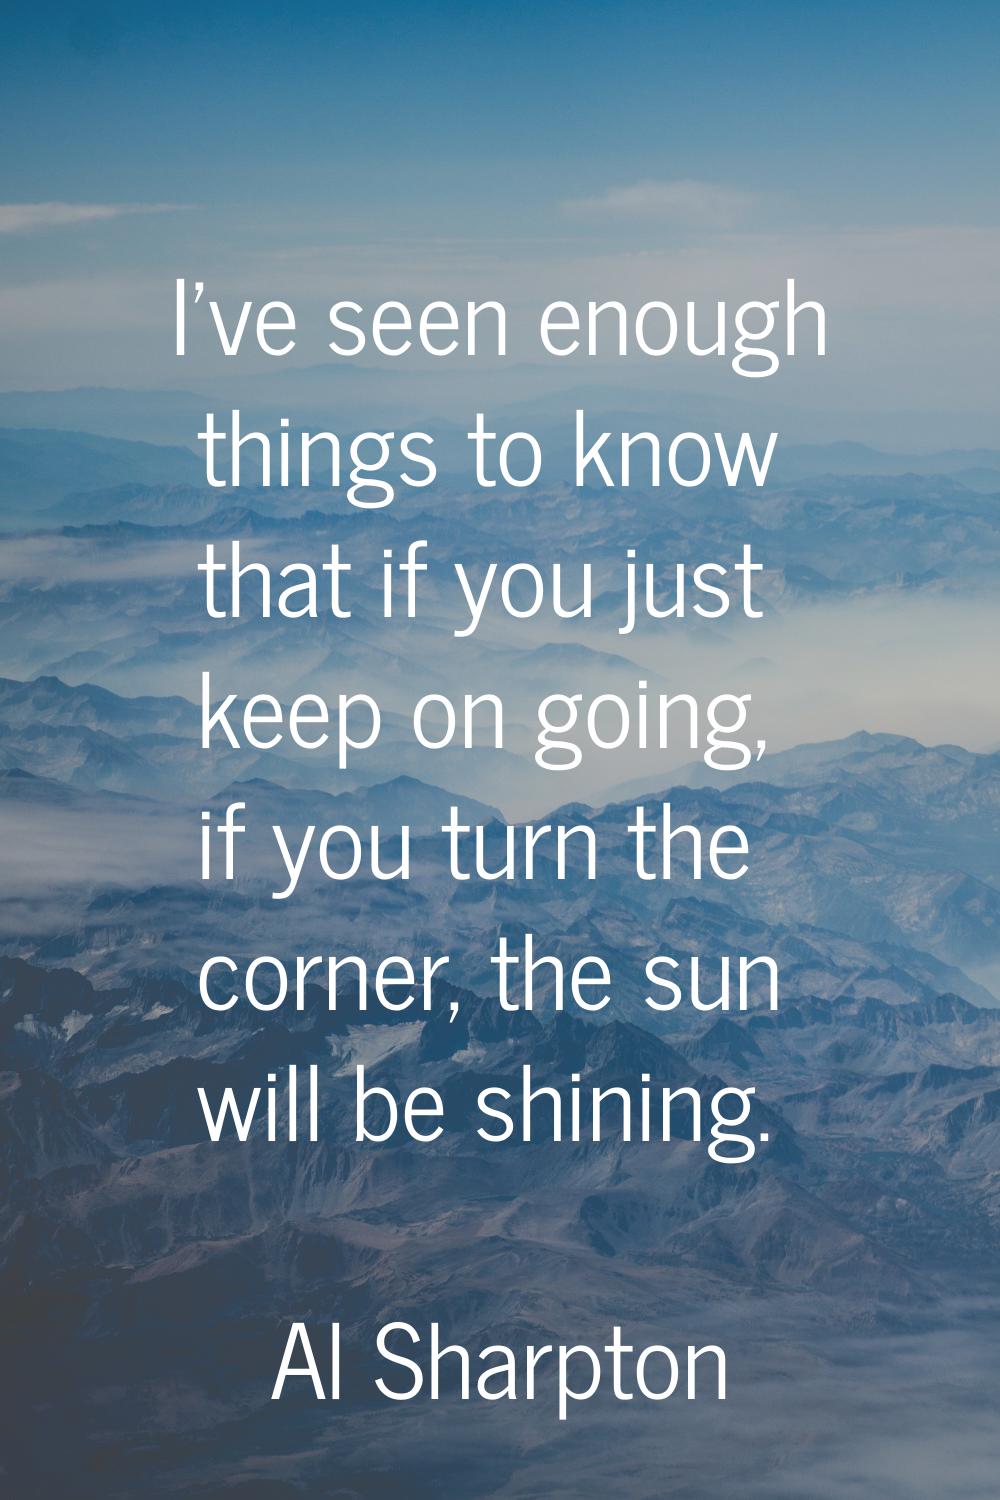 I've seen enough things to know that if you just keep on going, if you turn the corner, the sun wil